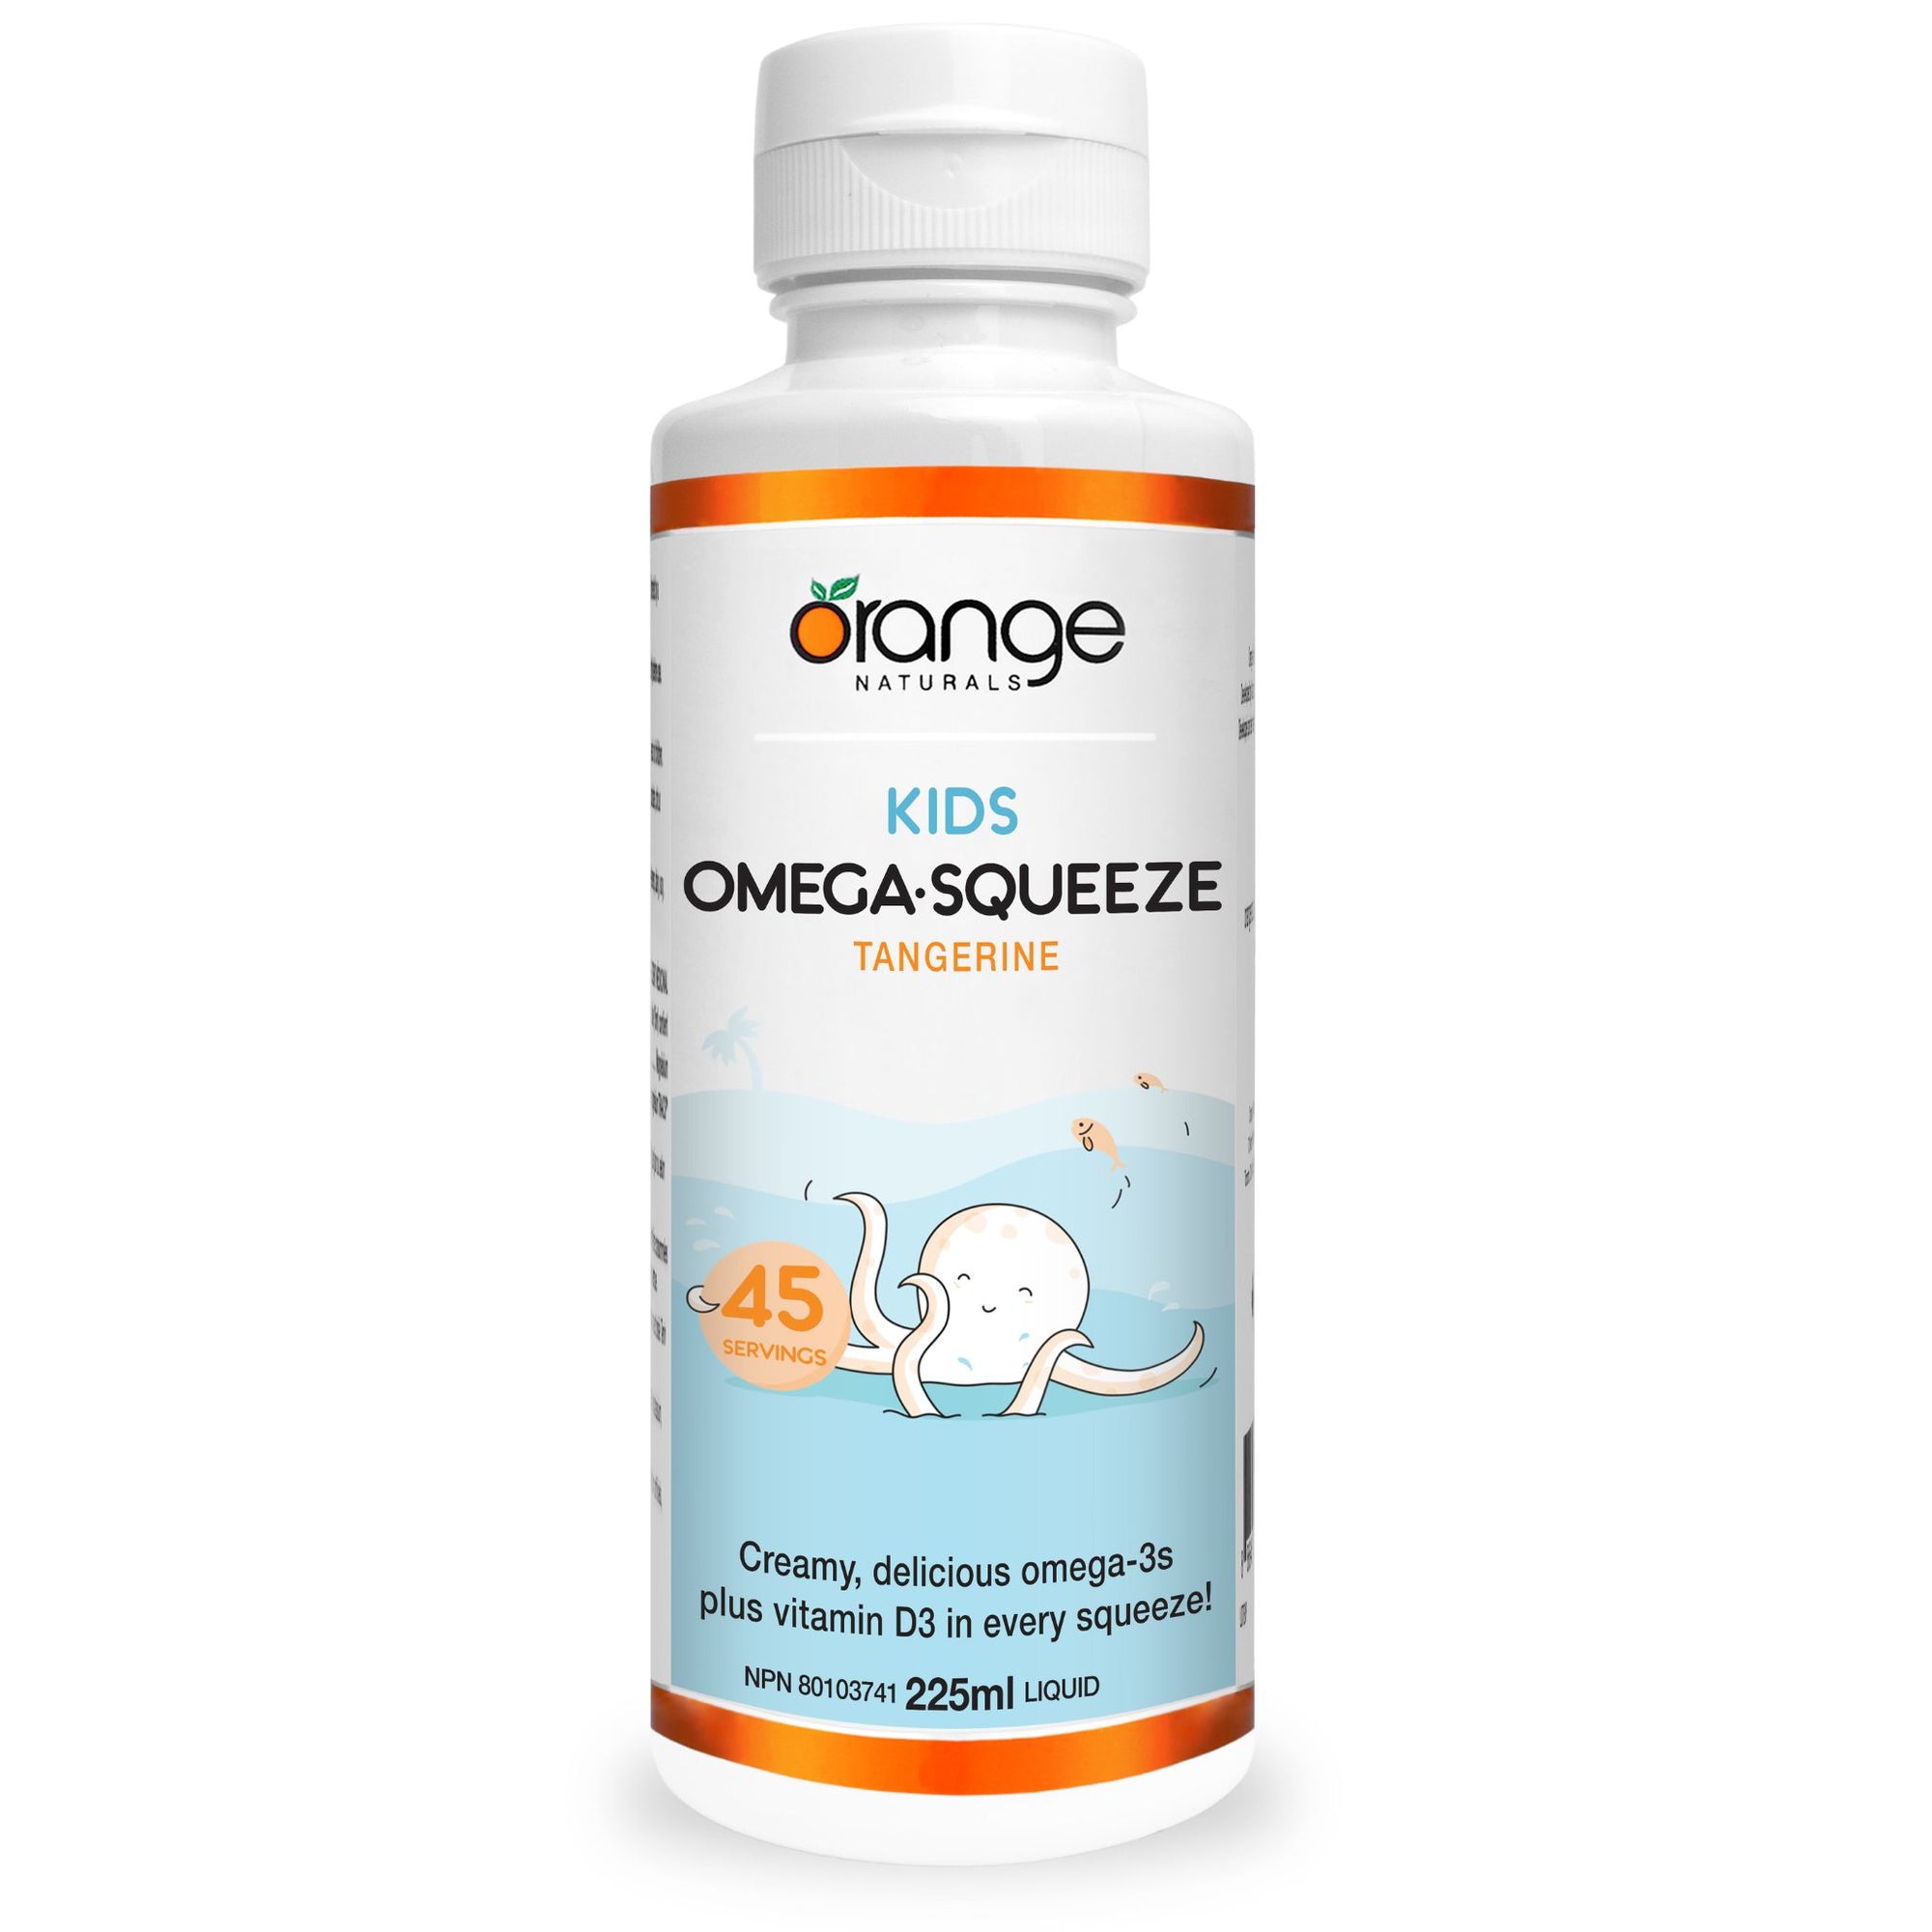 Orange Naturals Kids Omega Squeeze Tangerine flavour - 225ml bottle, 45 servings - Creamy, delicious omega-3s plus vitamin D3 in every squeeze!